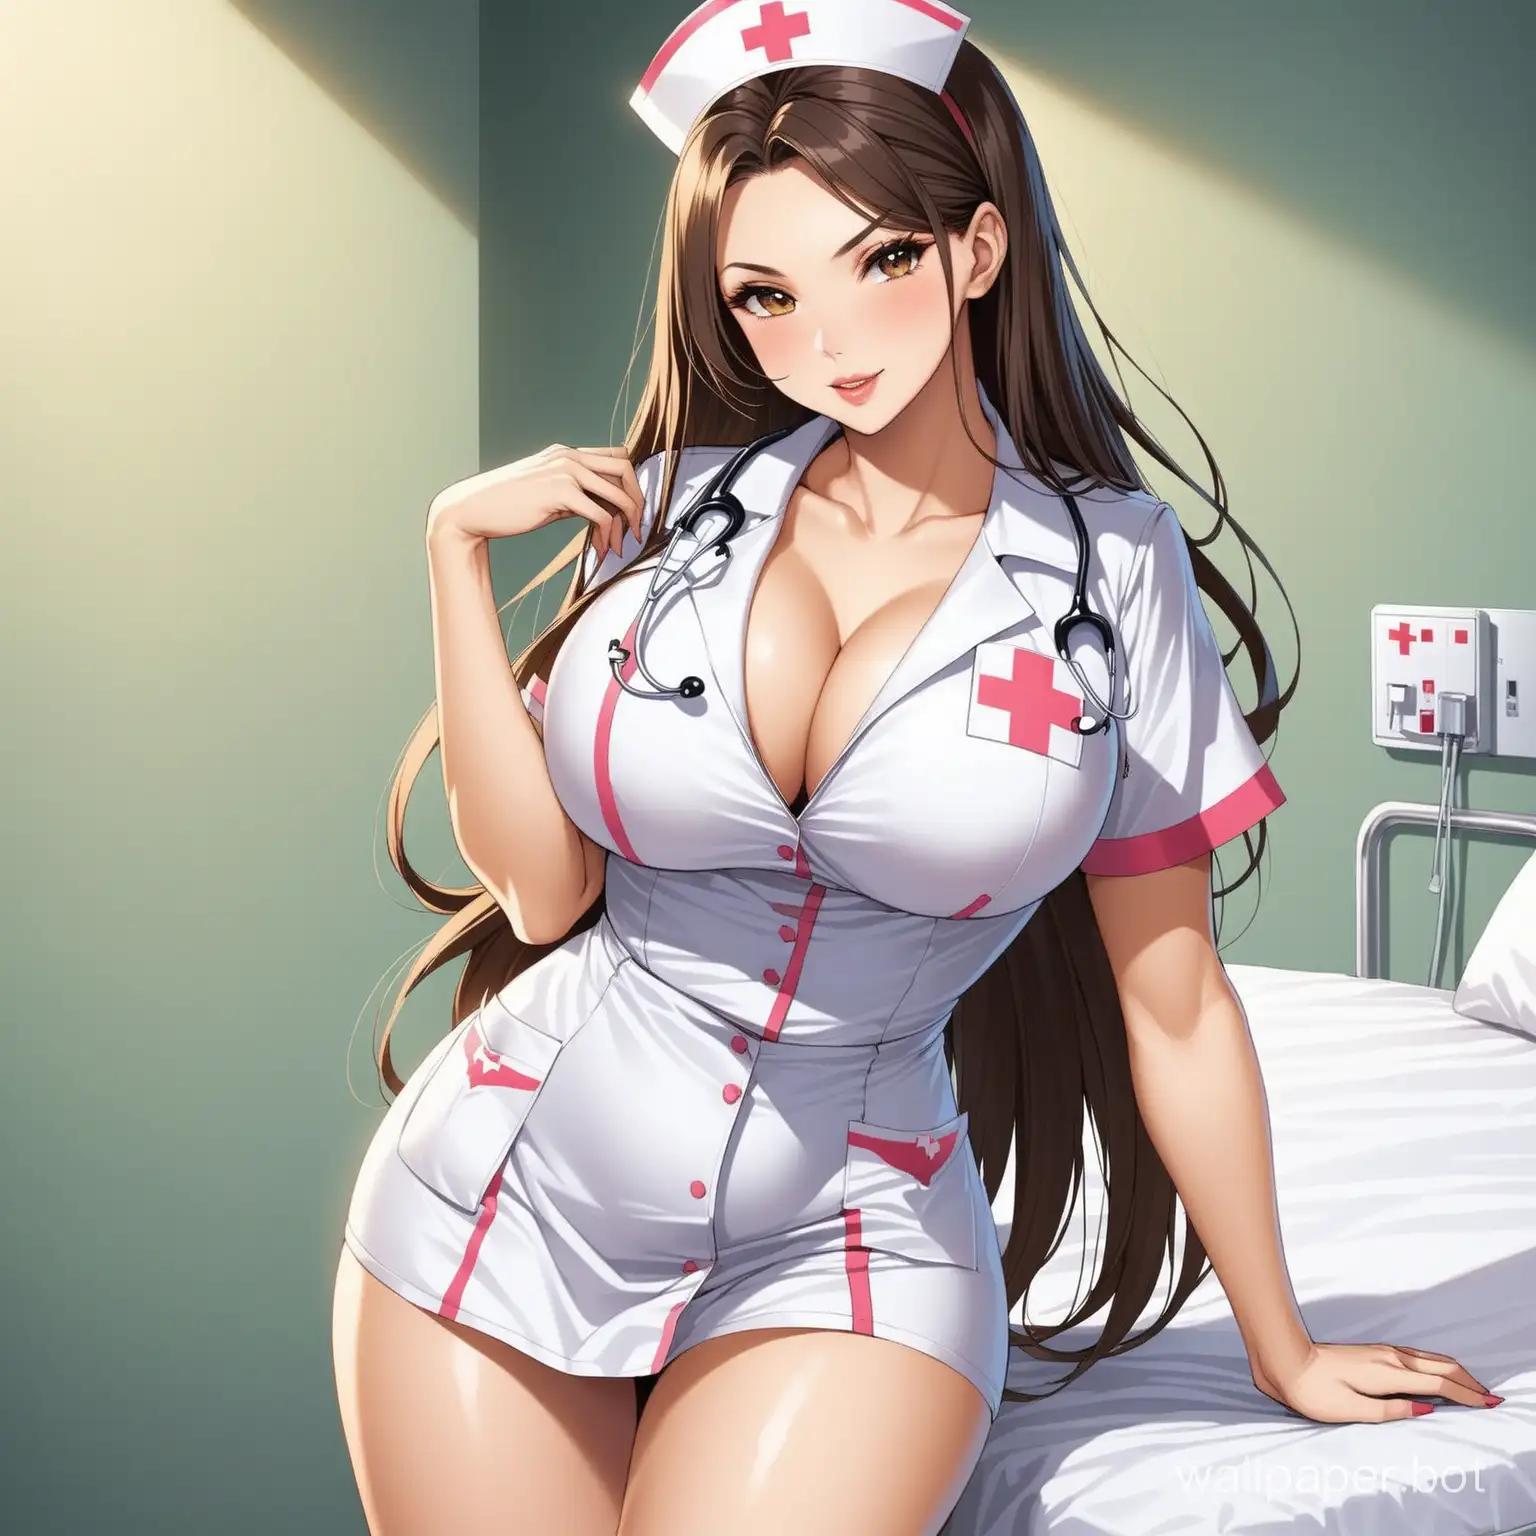 Sexy-Nurse-with-Long-Hair-and-Large-Chest-Stock-Image